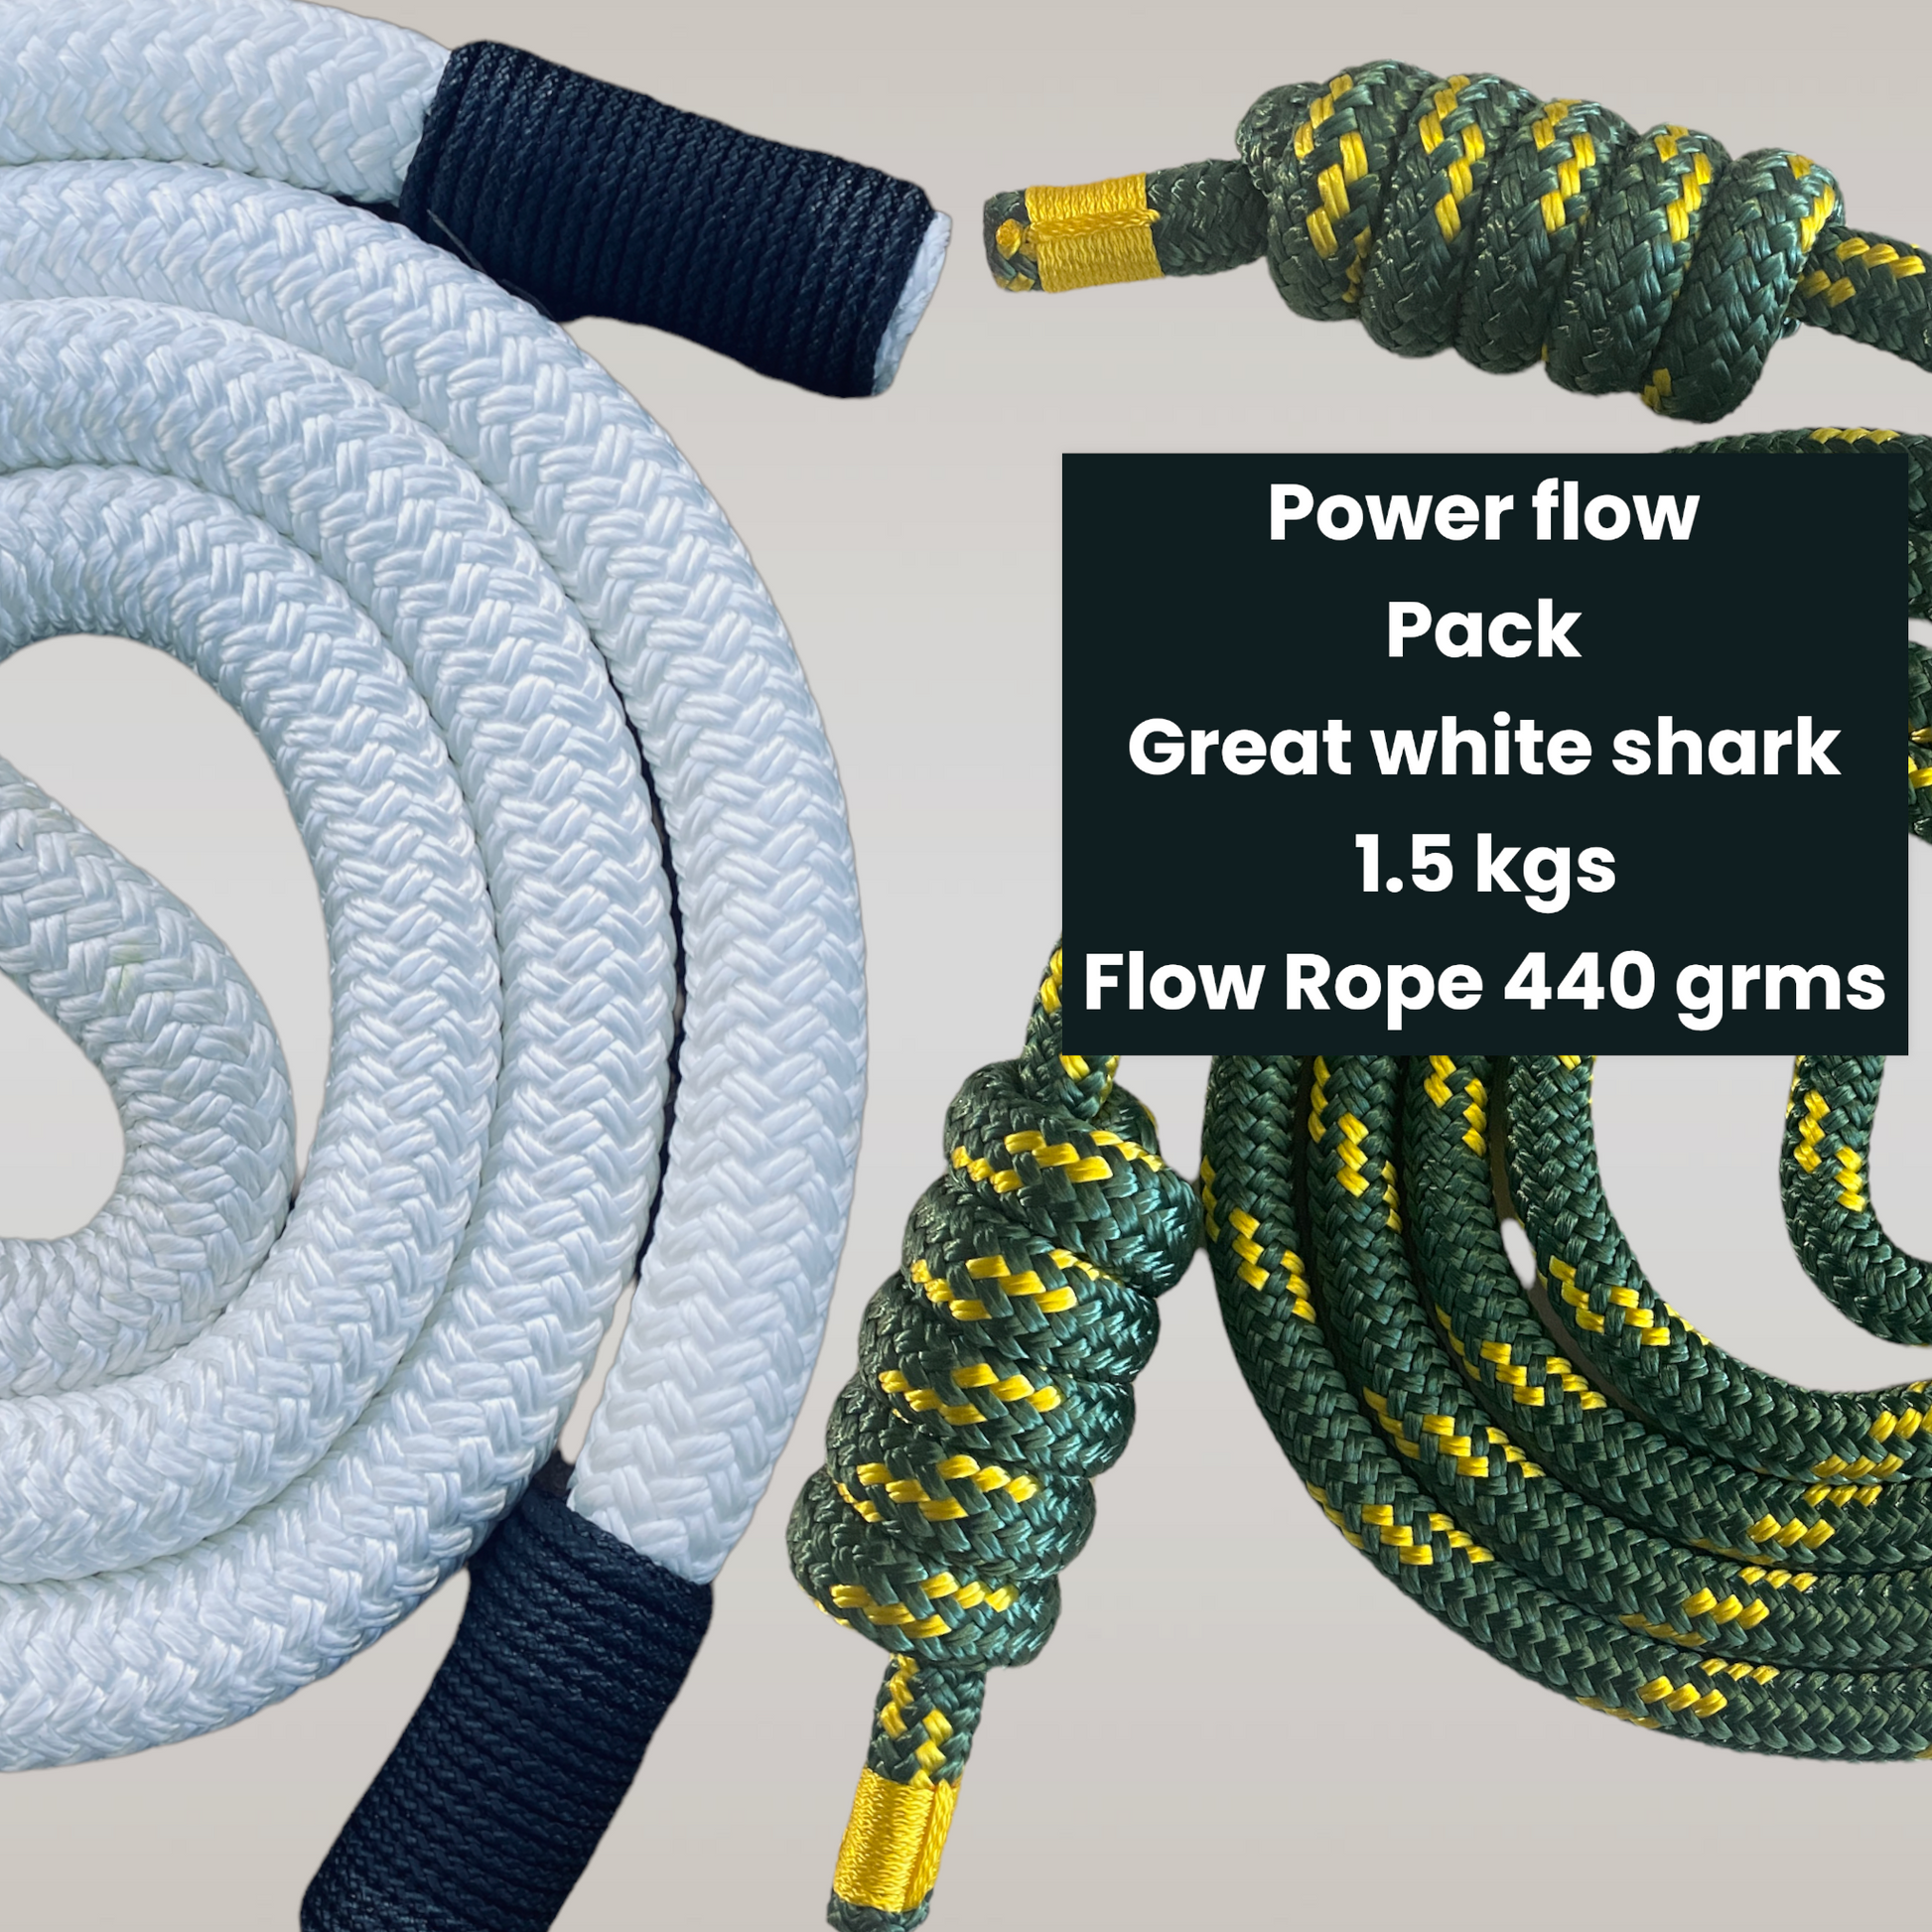 Heavy Rope Bundle SHARK Get Strong: Baby & Great White Shark